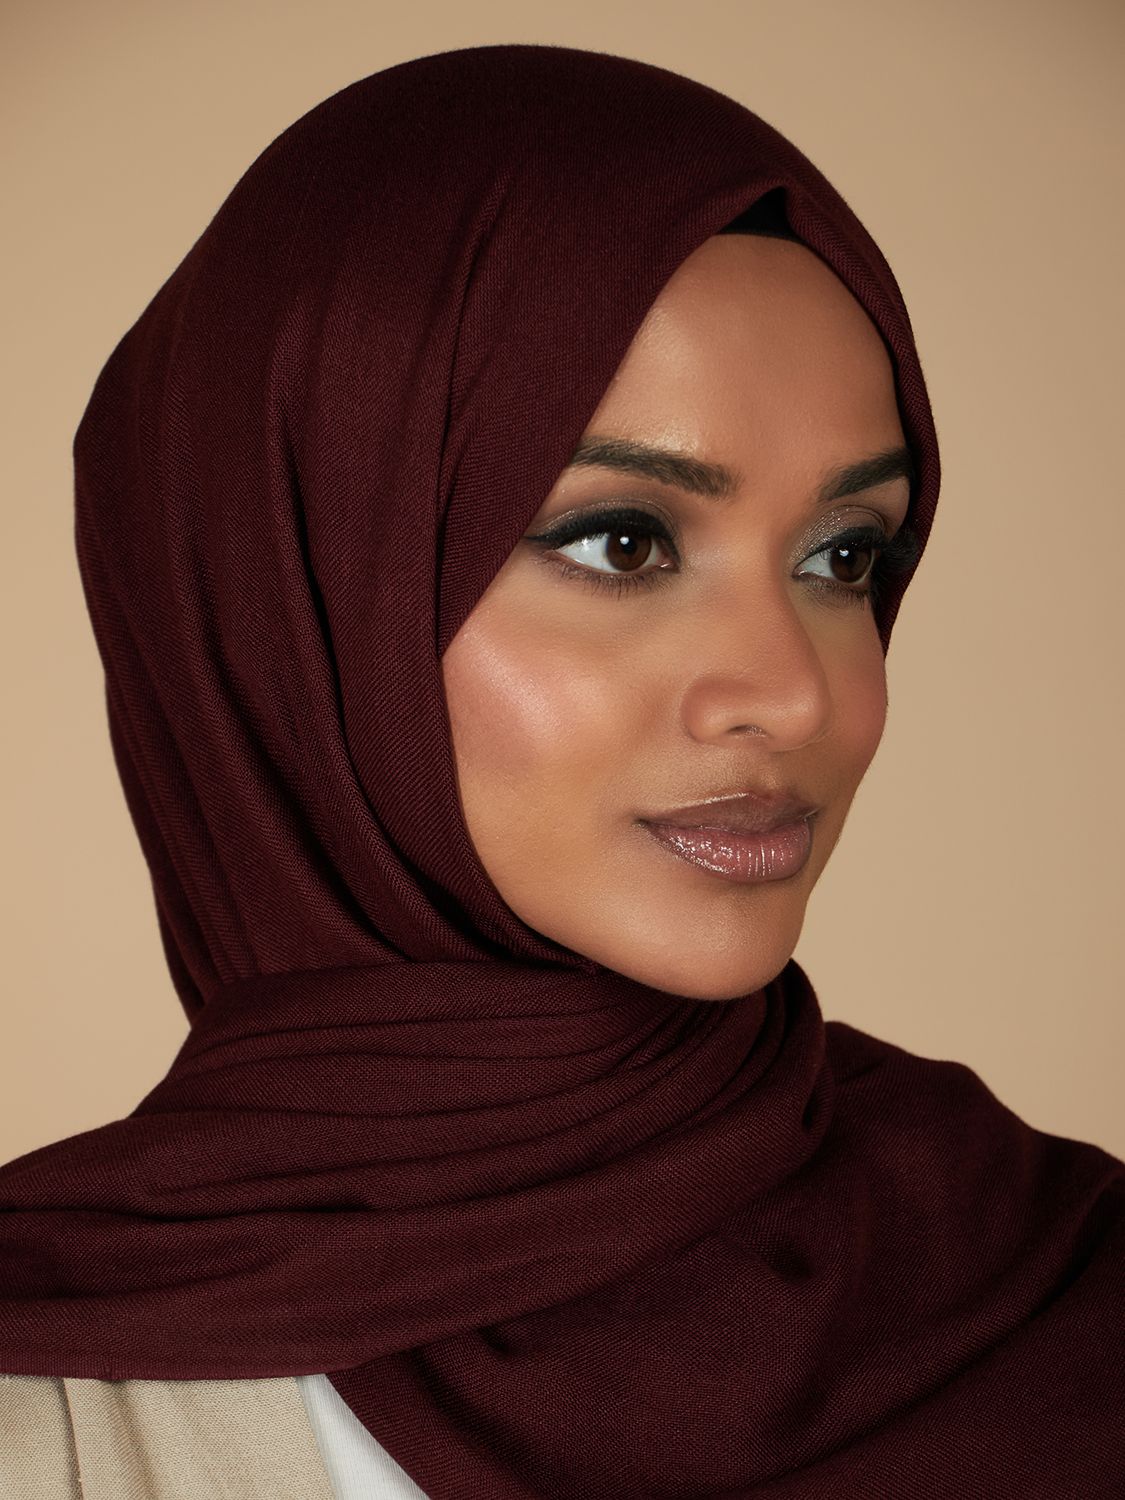 Aab Bamboo Hijab, Red Burgundy, One Size